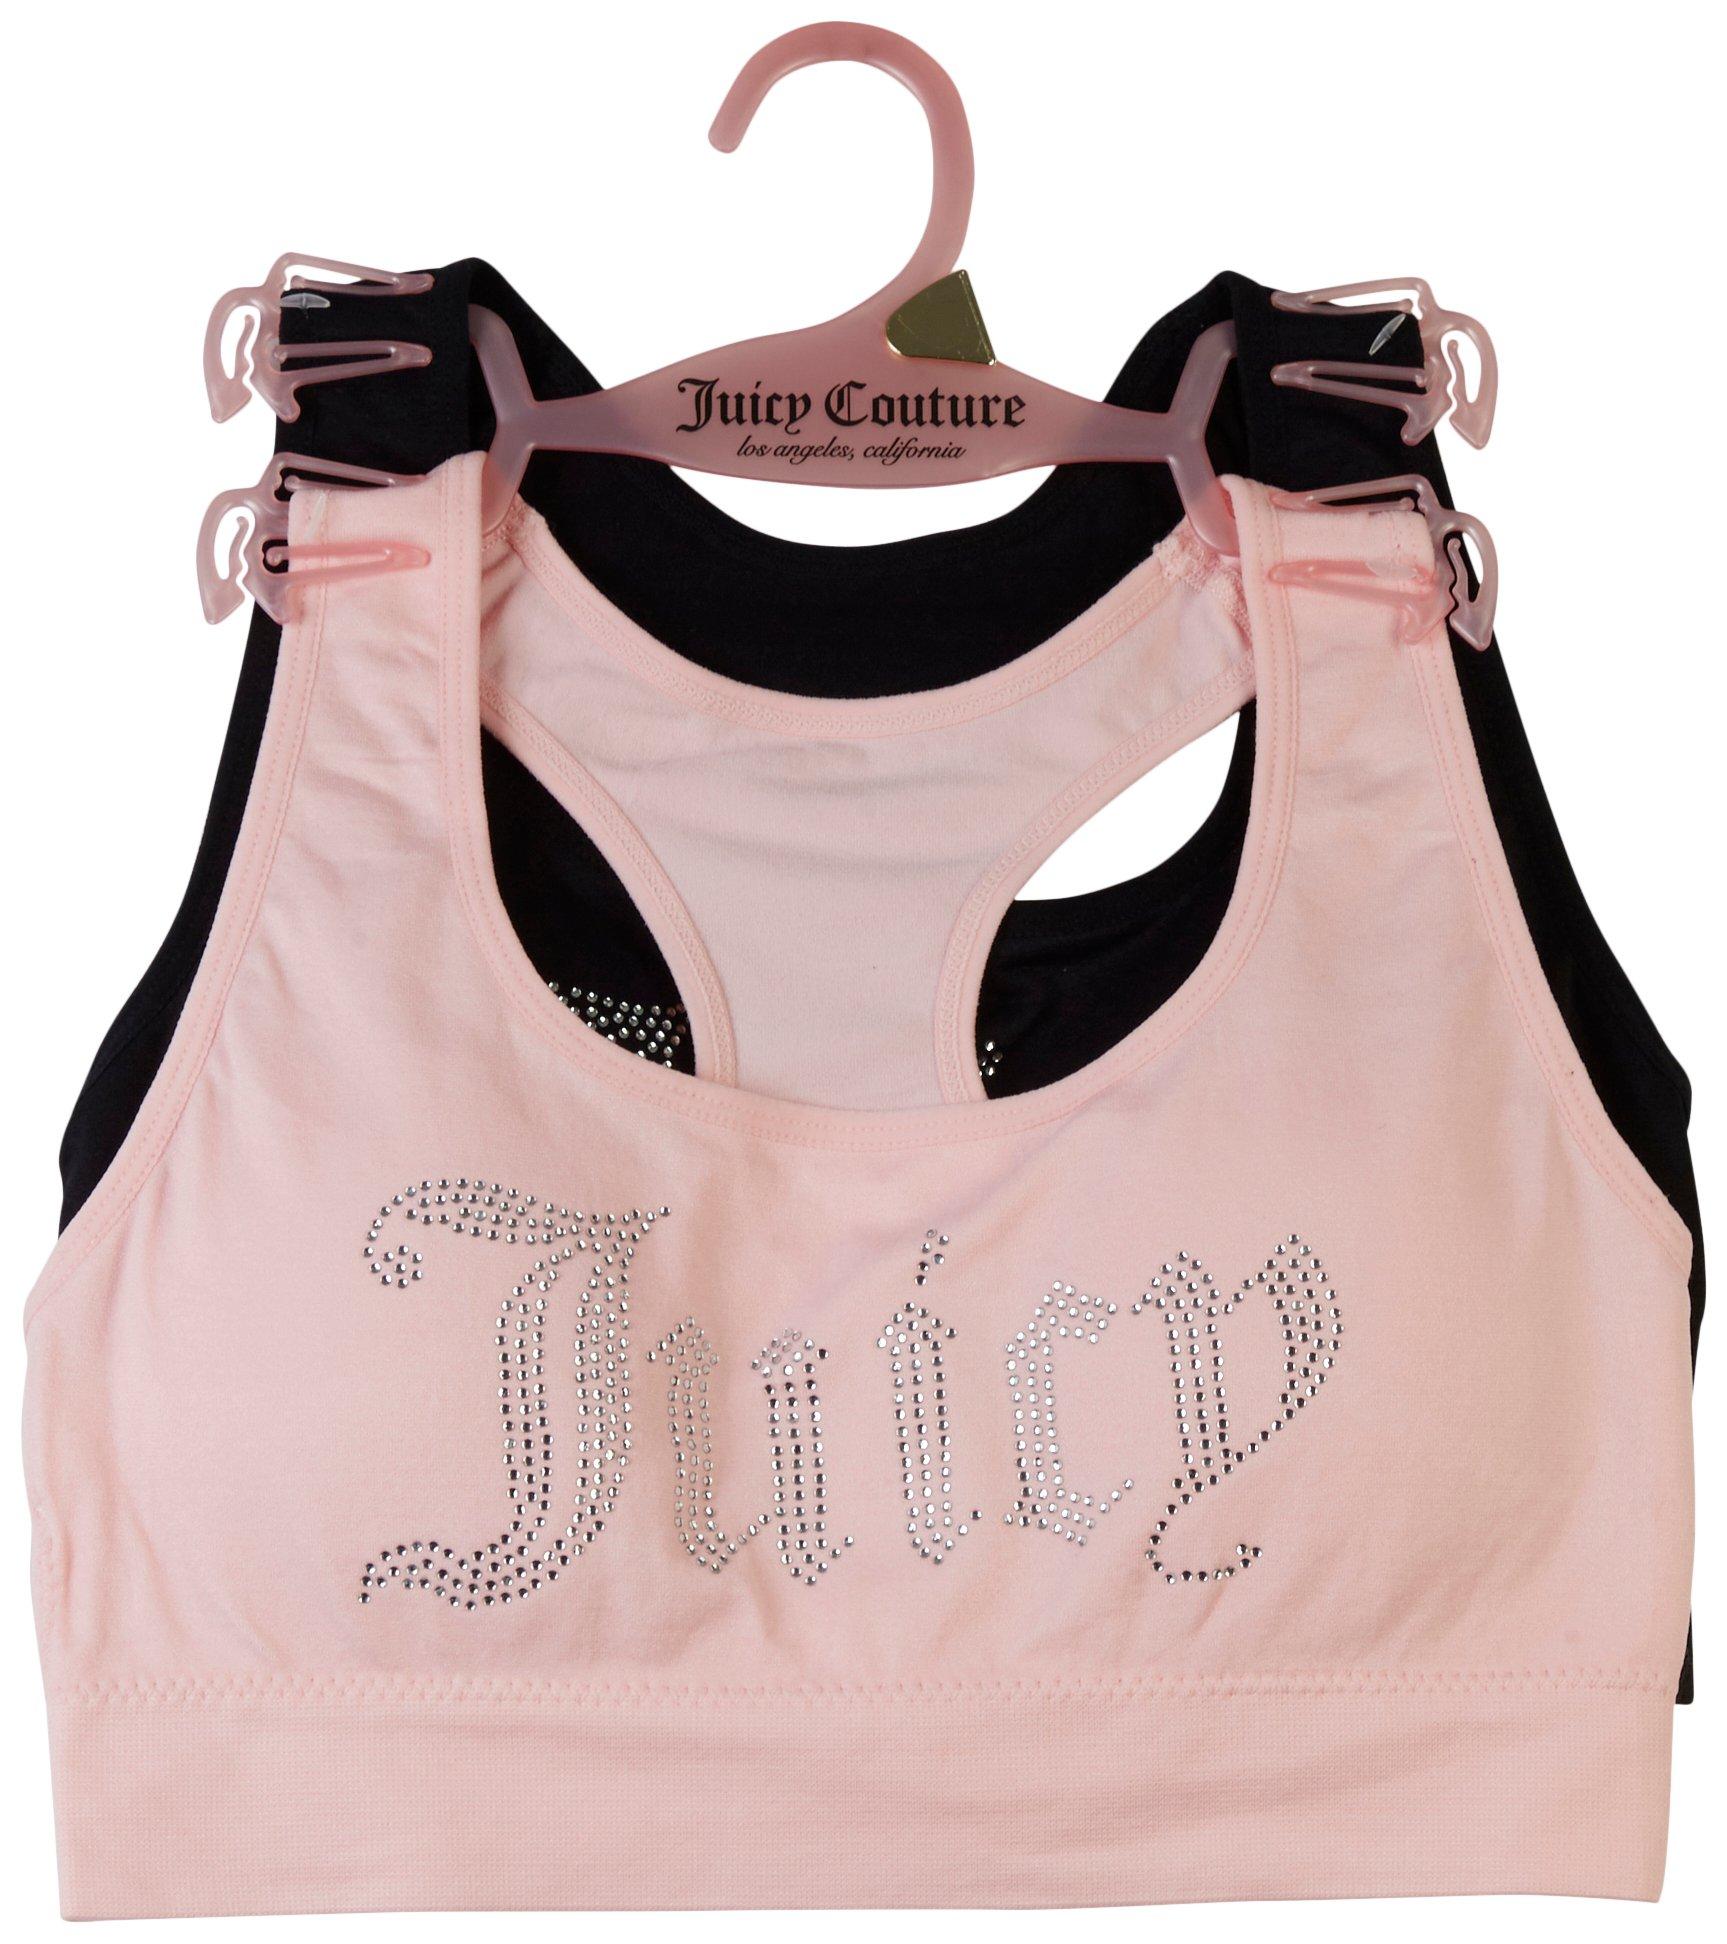 Juicy Couture, Intimates & Sleepwear, Hot Pink Juicy Couture Sports Bras